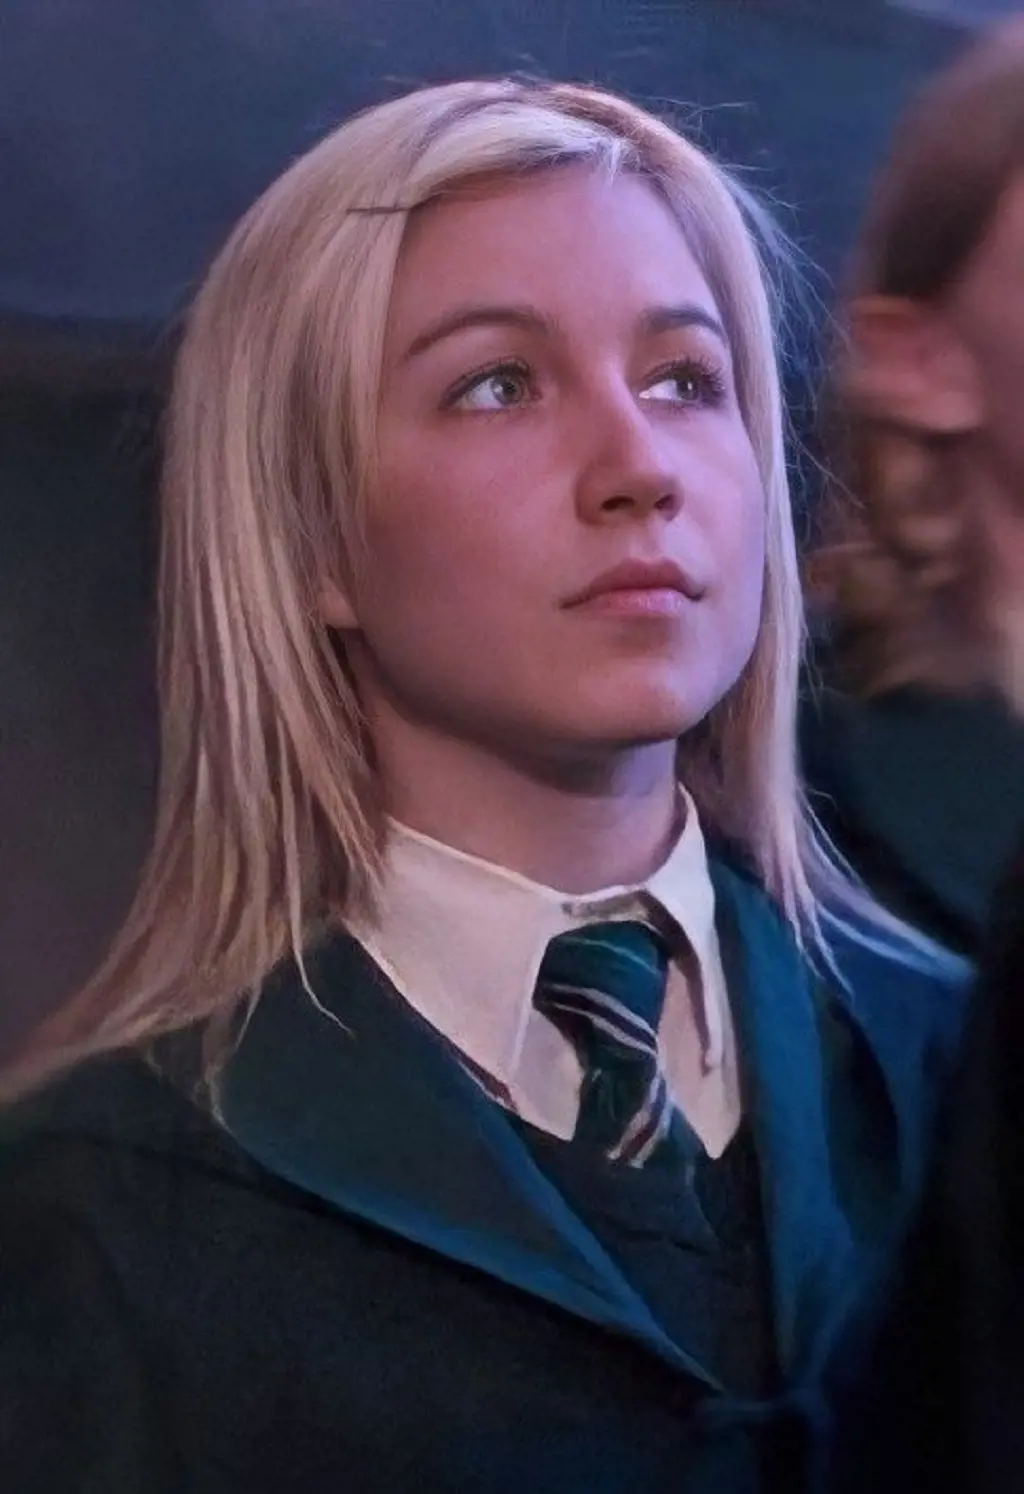 Daphne is a Slytherin student at Hogwarts in Harry's year